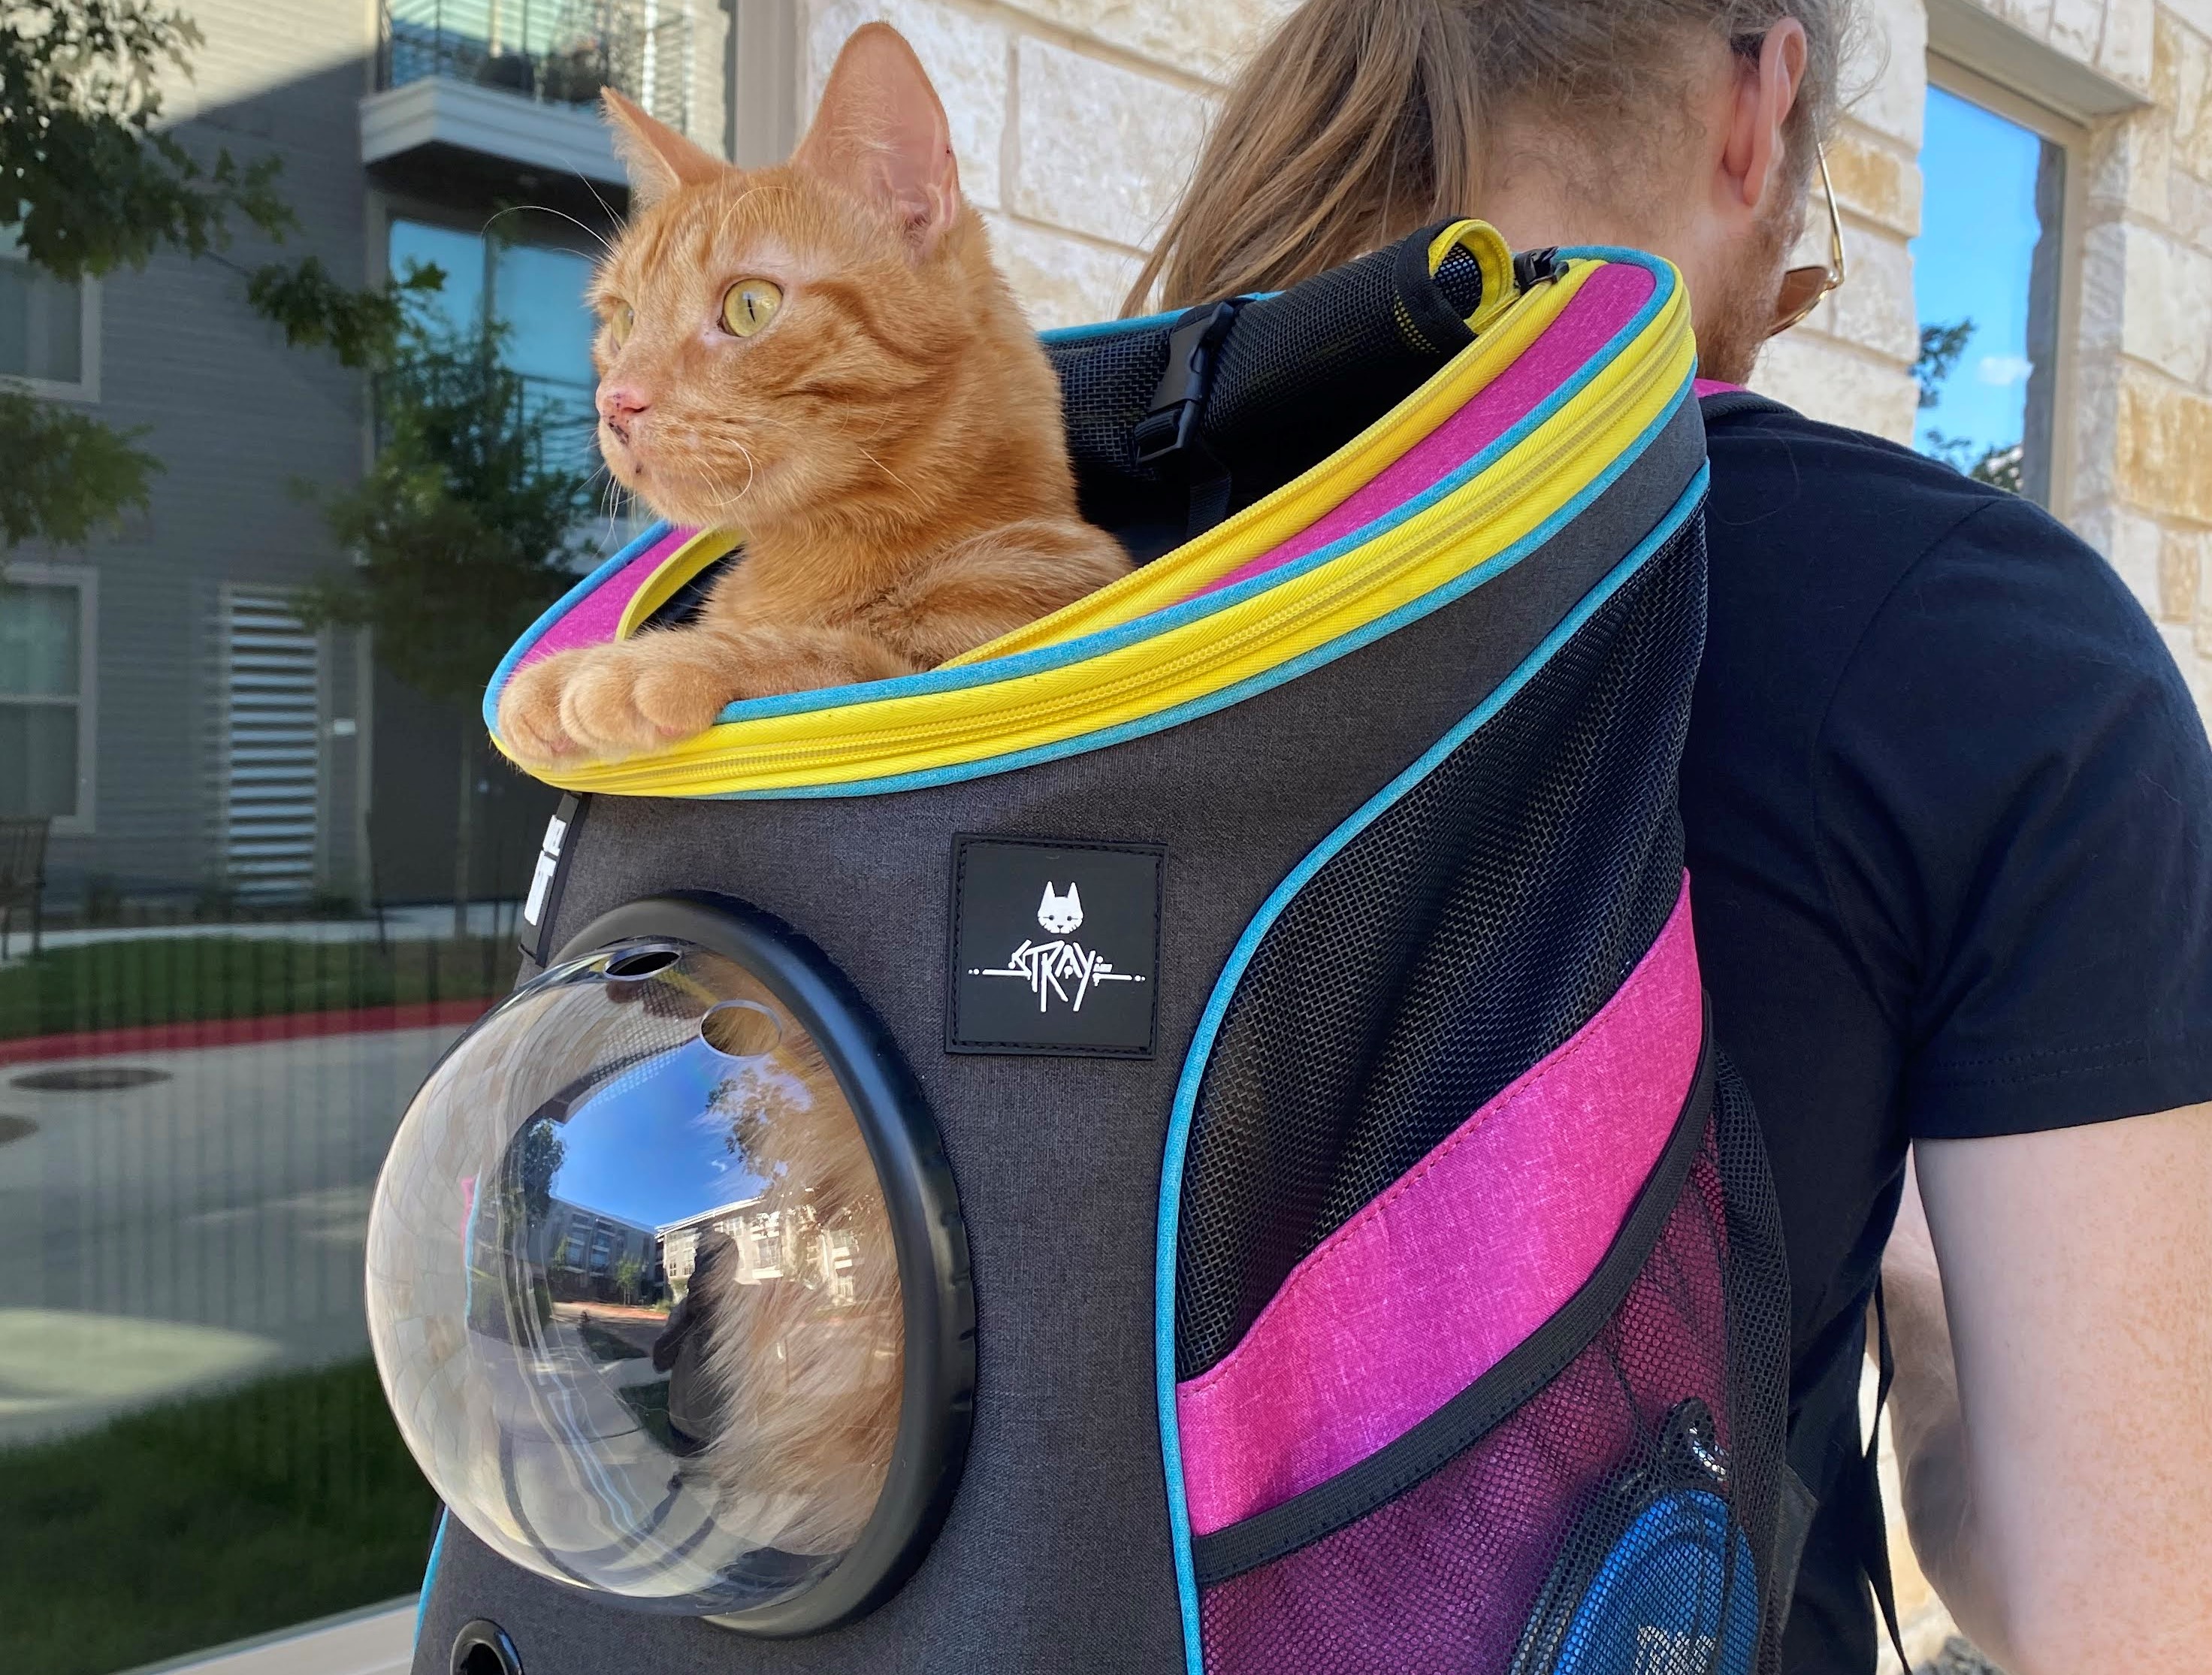 feline-adventure-game-stray-is-getting-a-limited-edition-cat-backpack-or-engadget